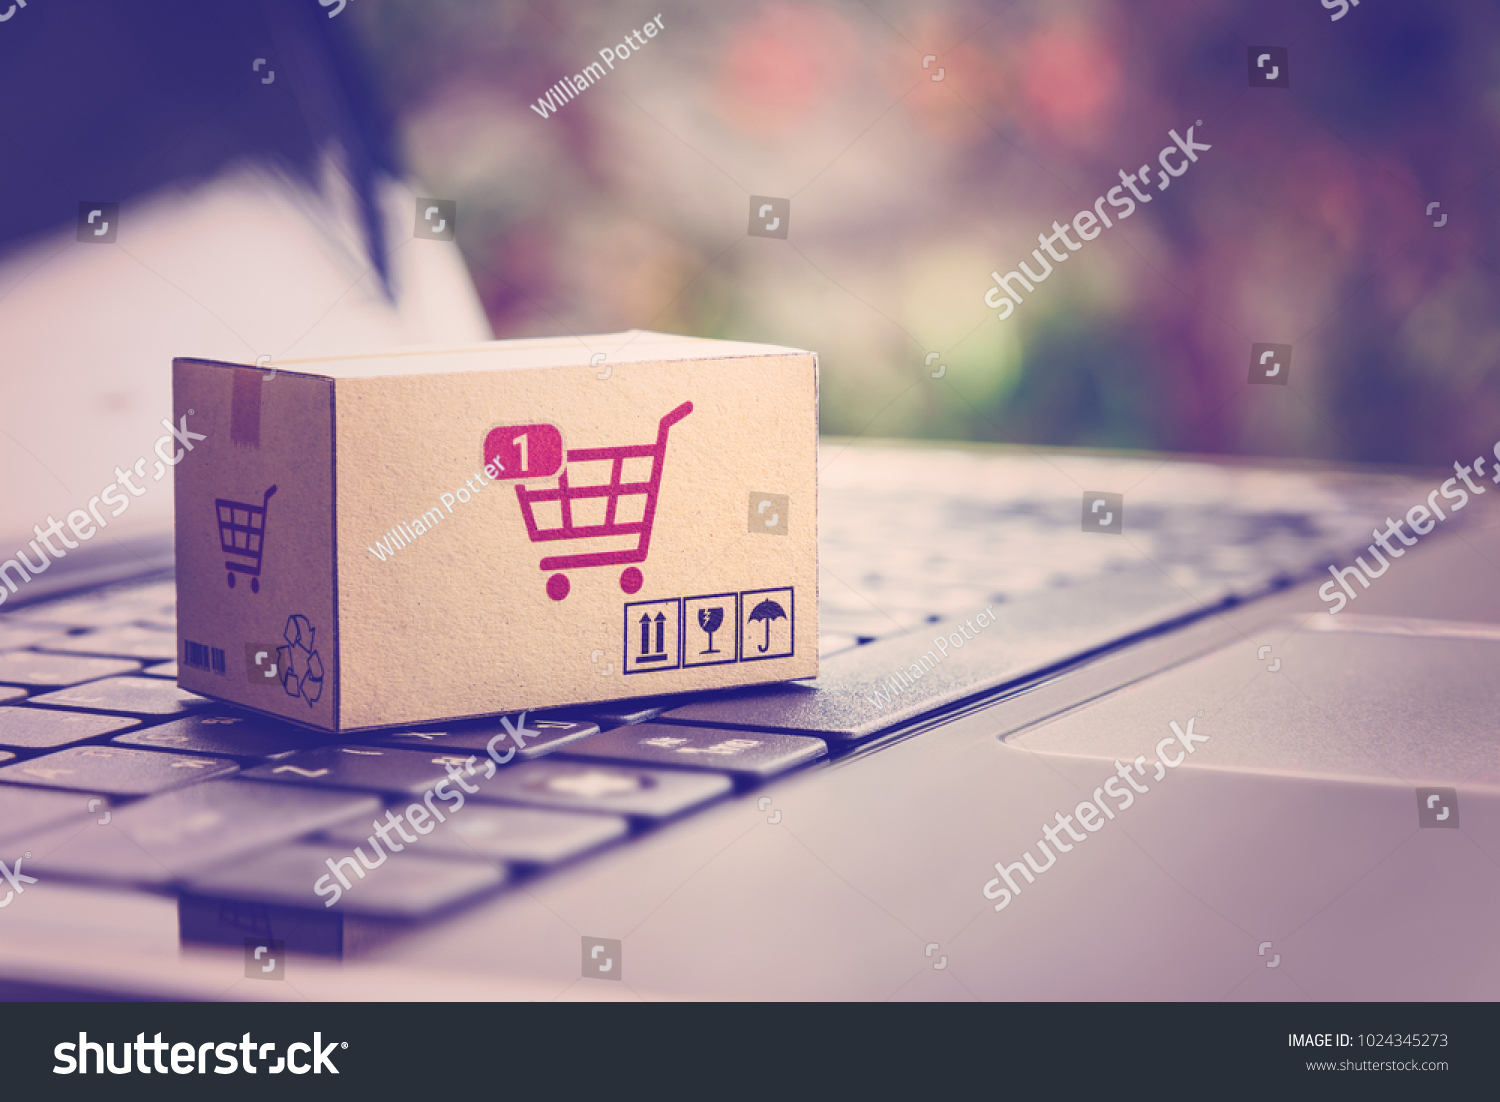 Online shopping / ecommerce and delivery service concept : Paper cartons with a shopping cart or trolley logo on a laptop keyboard, depicts customers order things from retailer sites via the internet. #1024345273